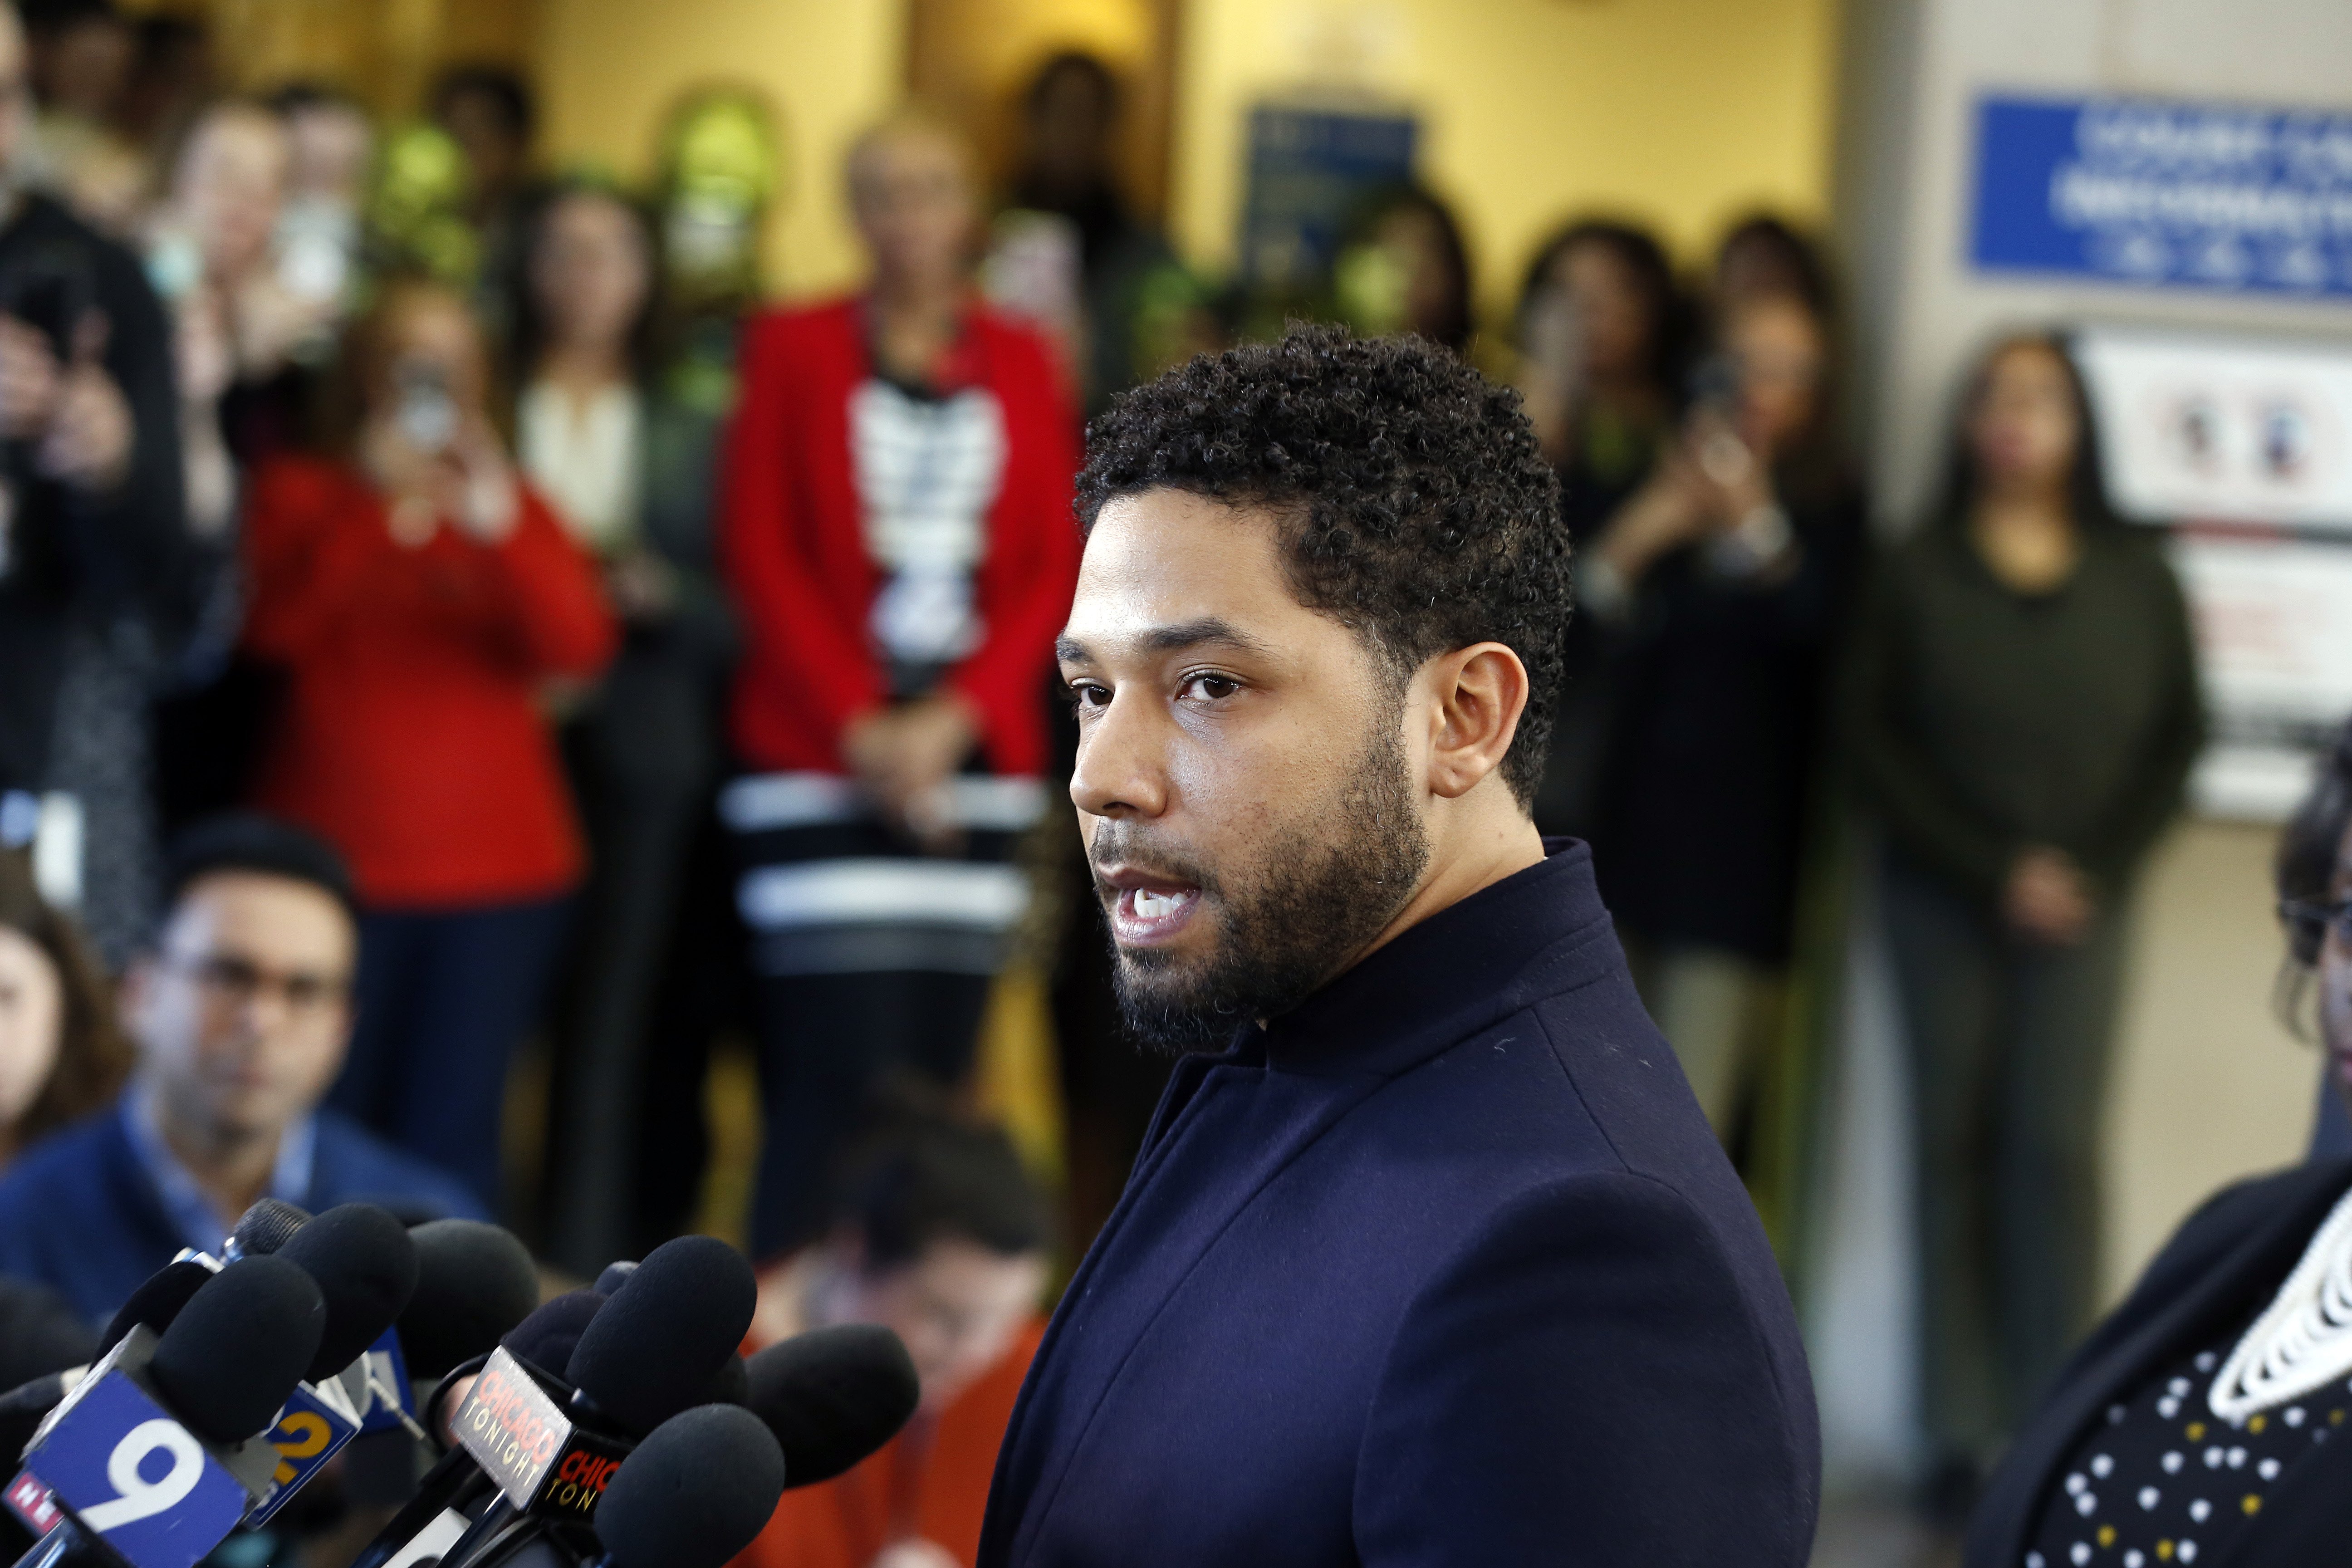 Jussie Smollett giving a conference in Chicago in March 2019 | Photo: Getty Images